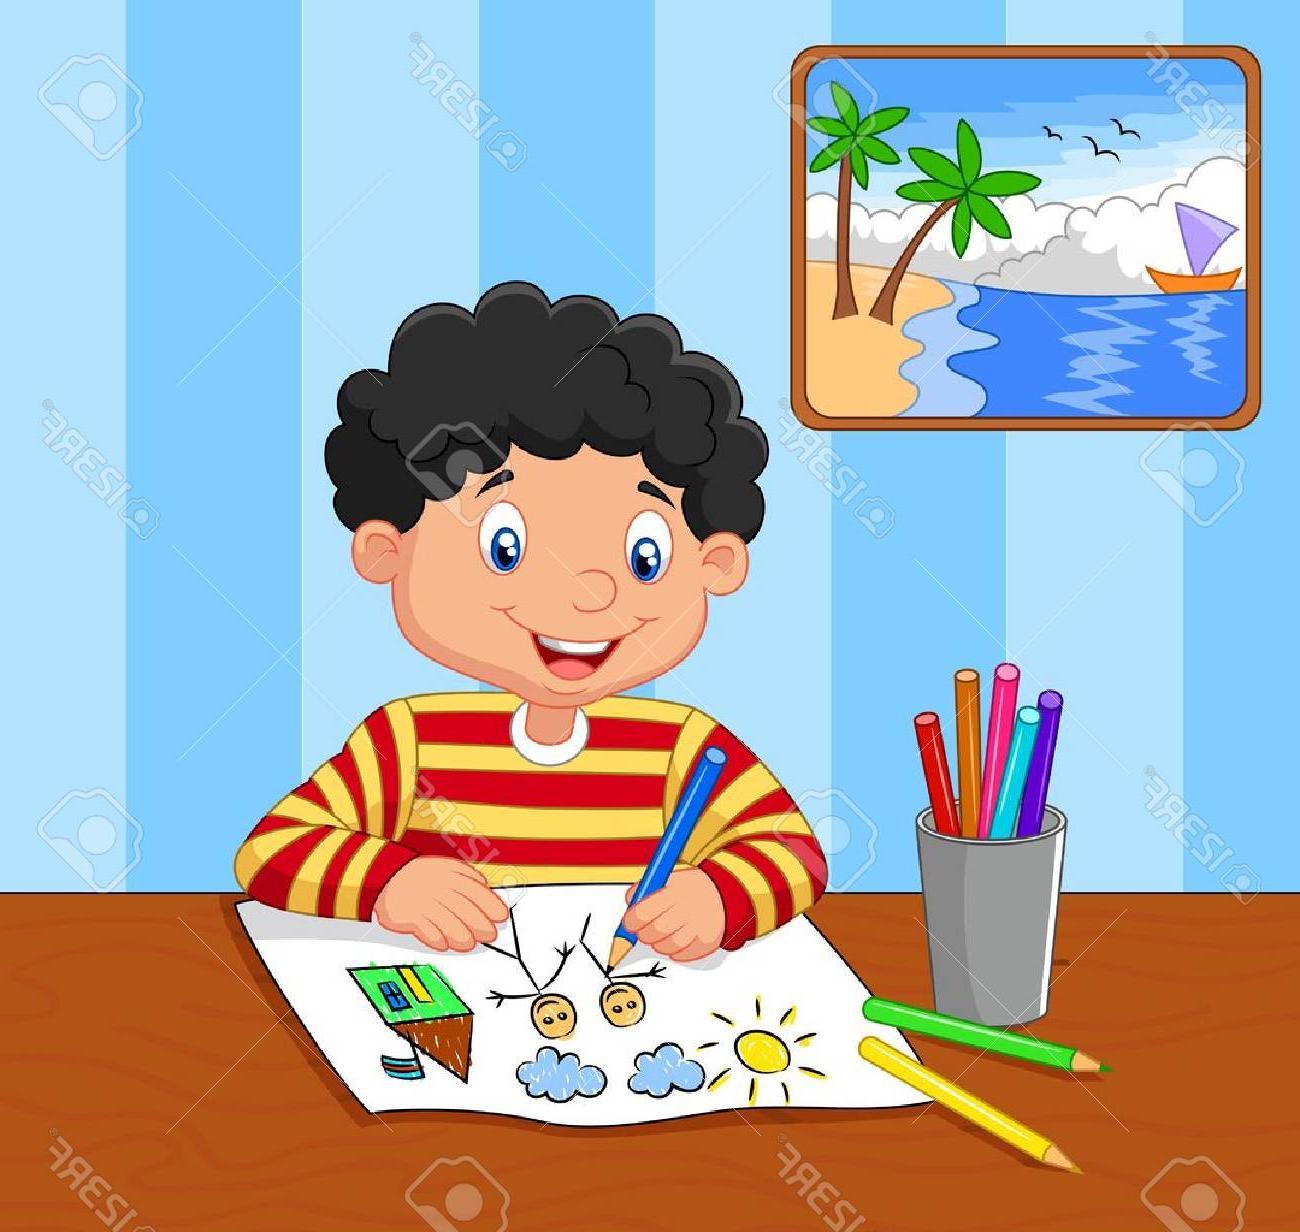 Boy drawing clipart.